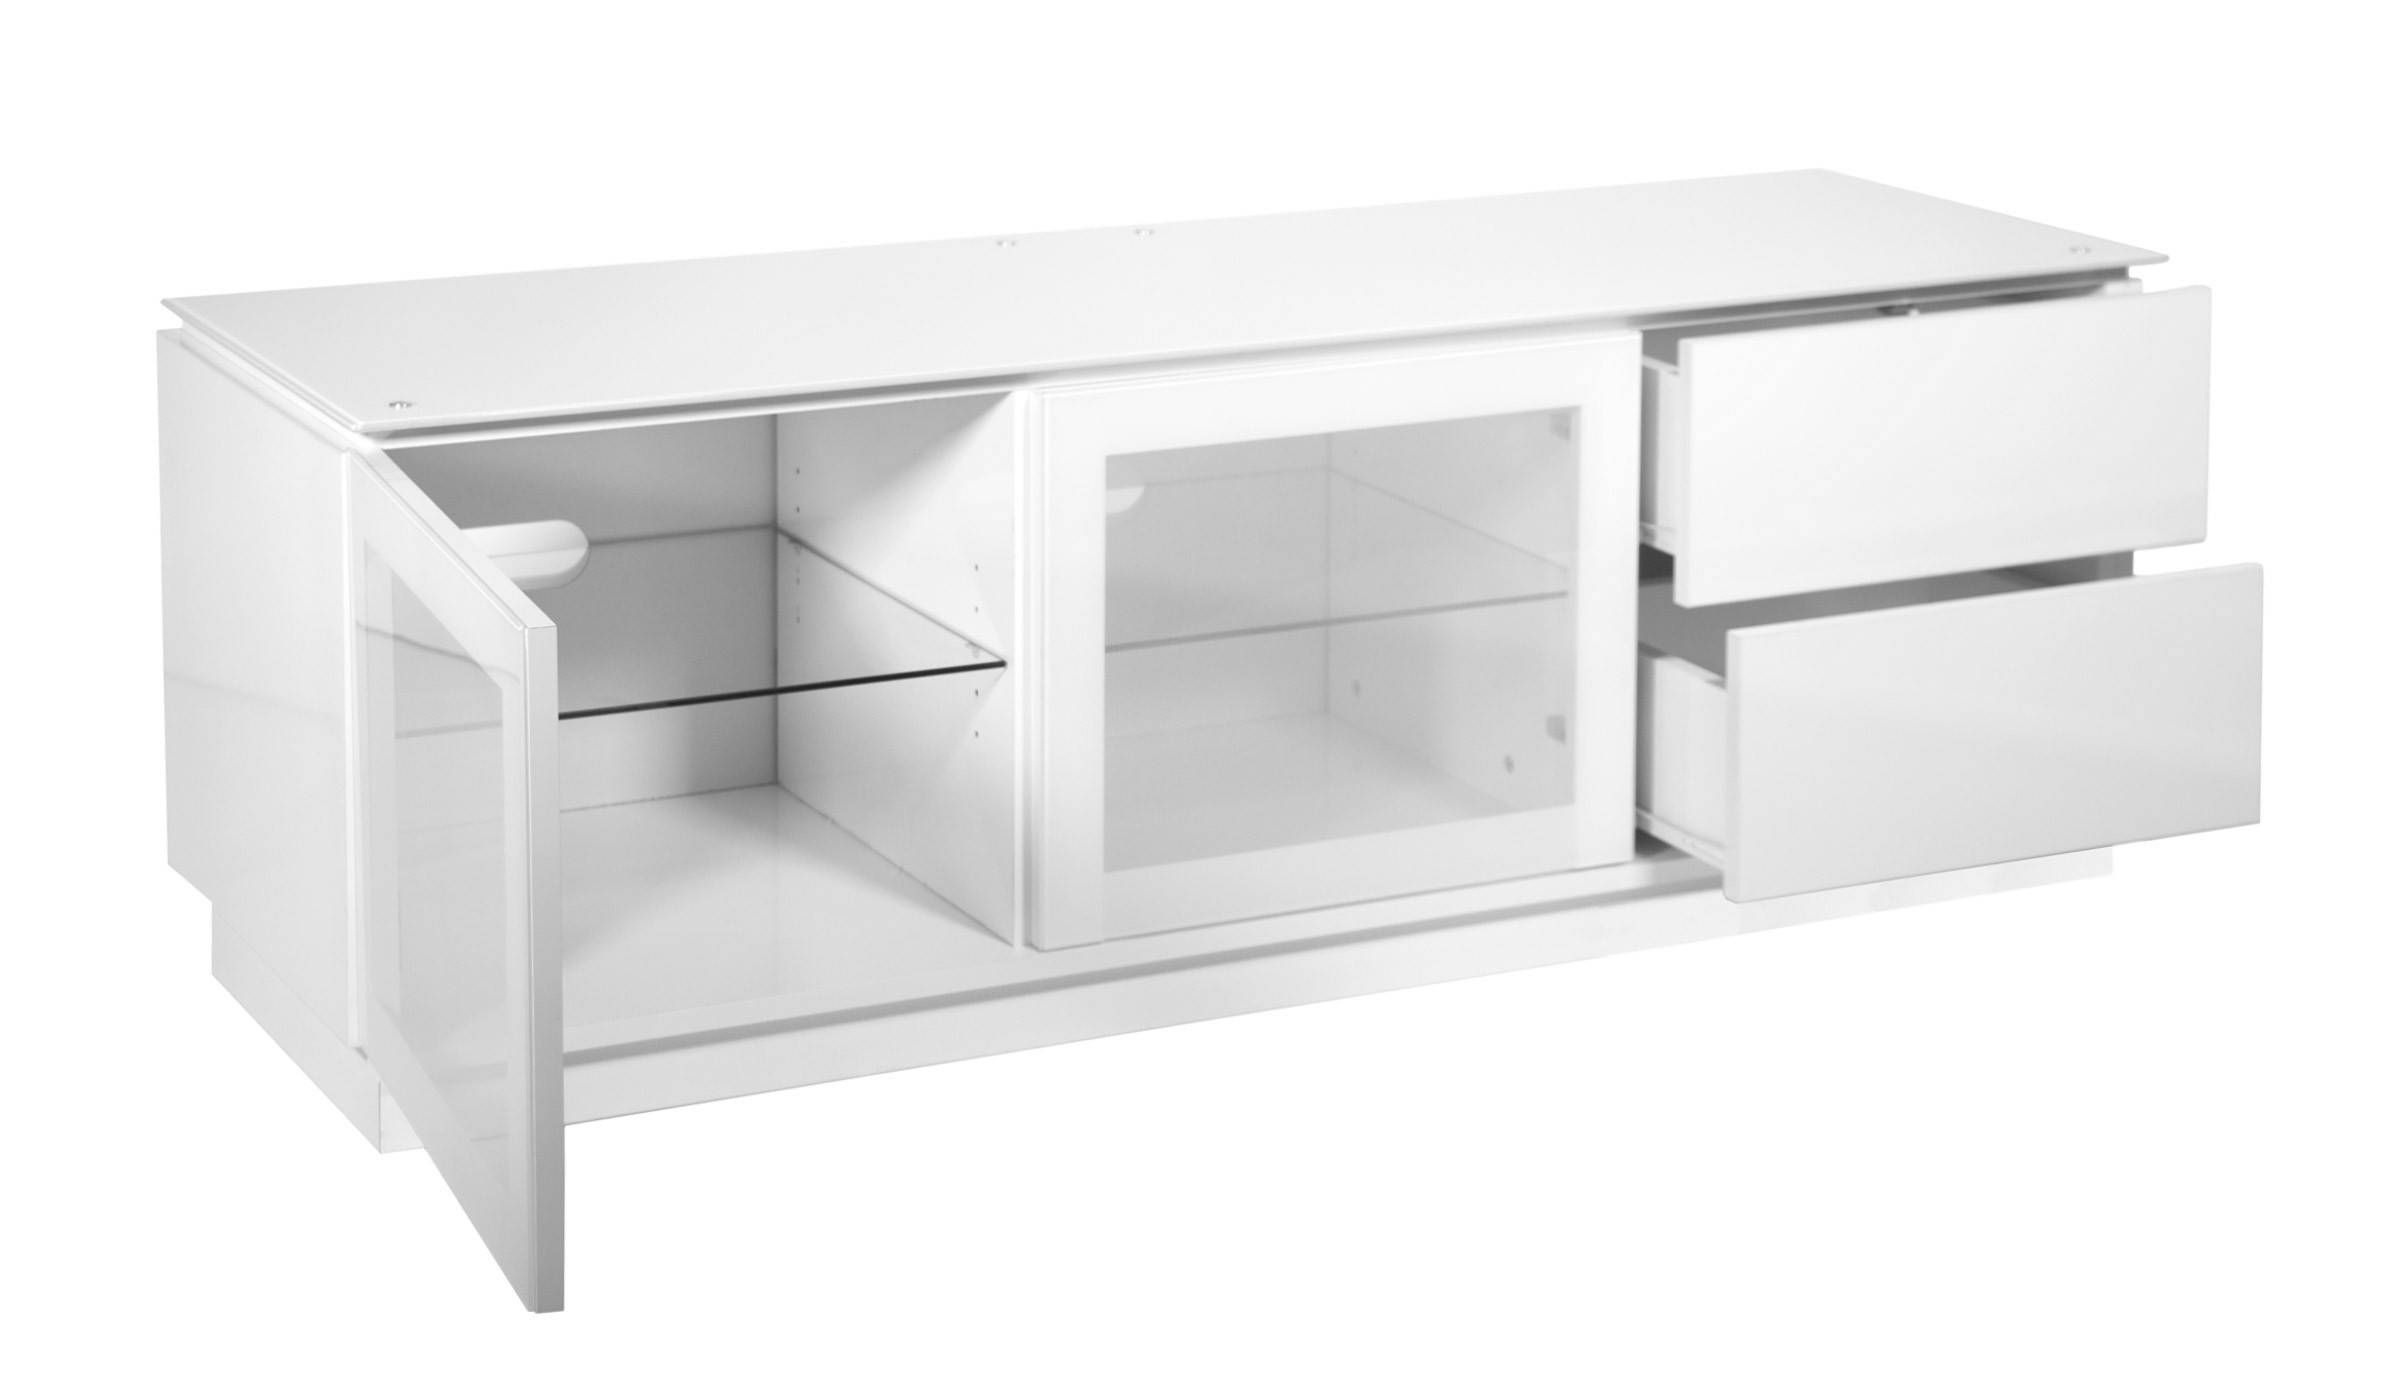 White Gloss Tv Cabinet Up To 55" Tv | Casino Mmt C1350w Inside White Gloss Tv Cabinets (View 2 of 15)